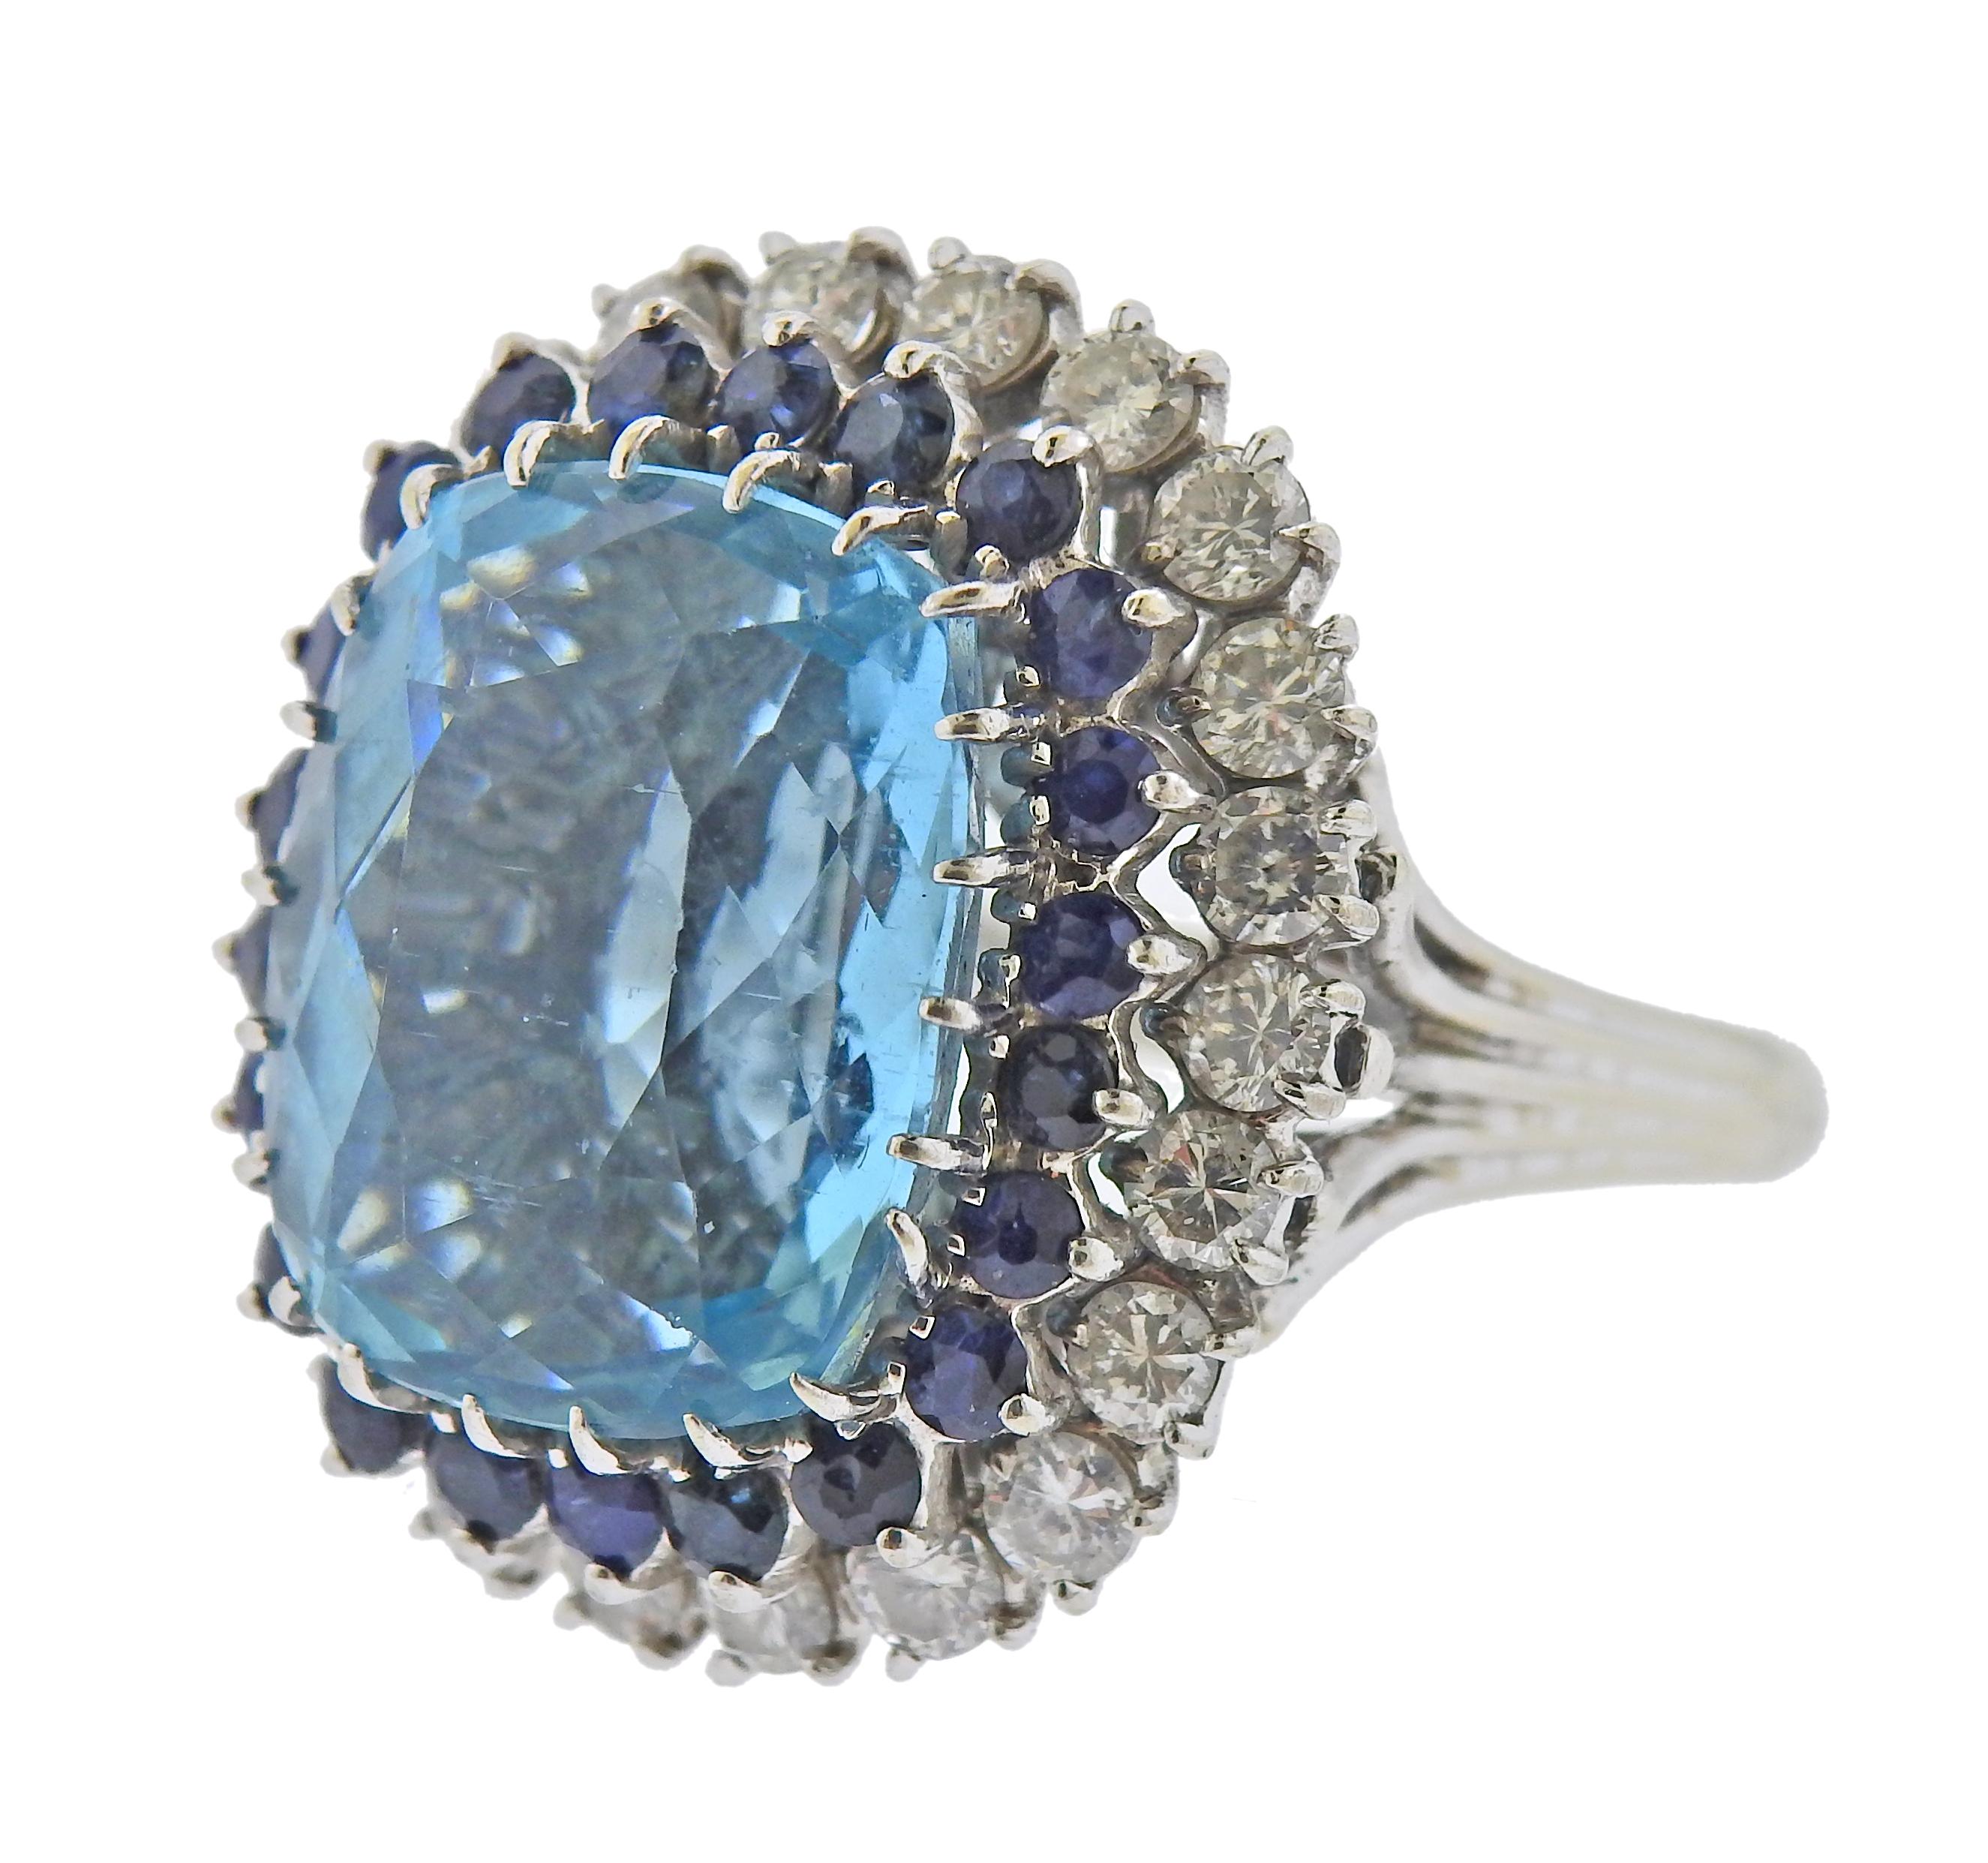 Large 18k gold ring, with center approx. 14.5ct aquamarine (approx. 17.2 x 14.5 x 9.5mm) , surrounded with sapphires and approx. 2.20ctw in diamonds. Ring size - 9.75, ring top - 26mm x 24mm. Tested 18k. Weight - 14.5 grams.